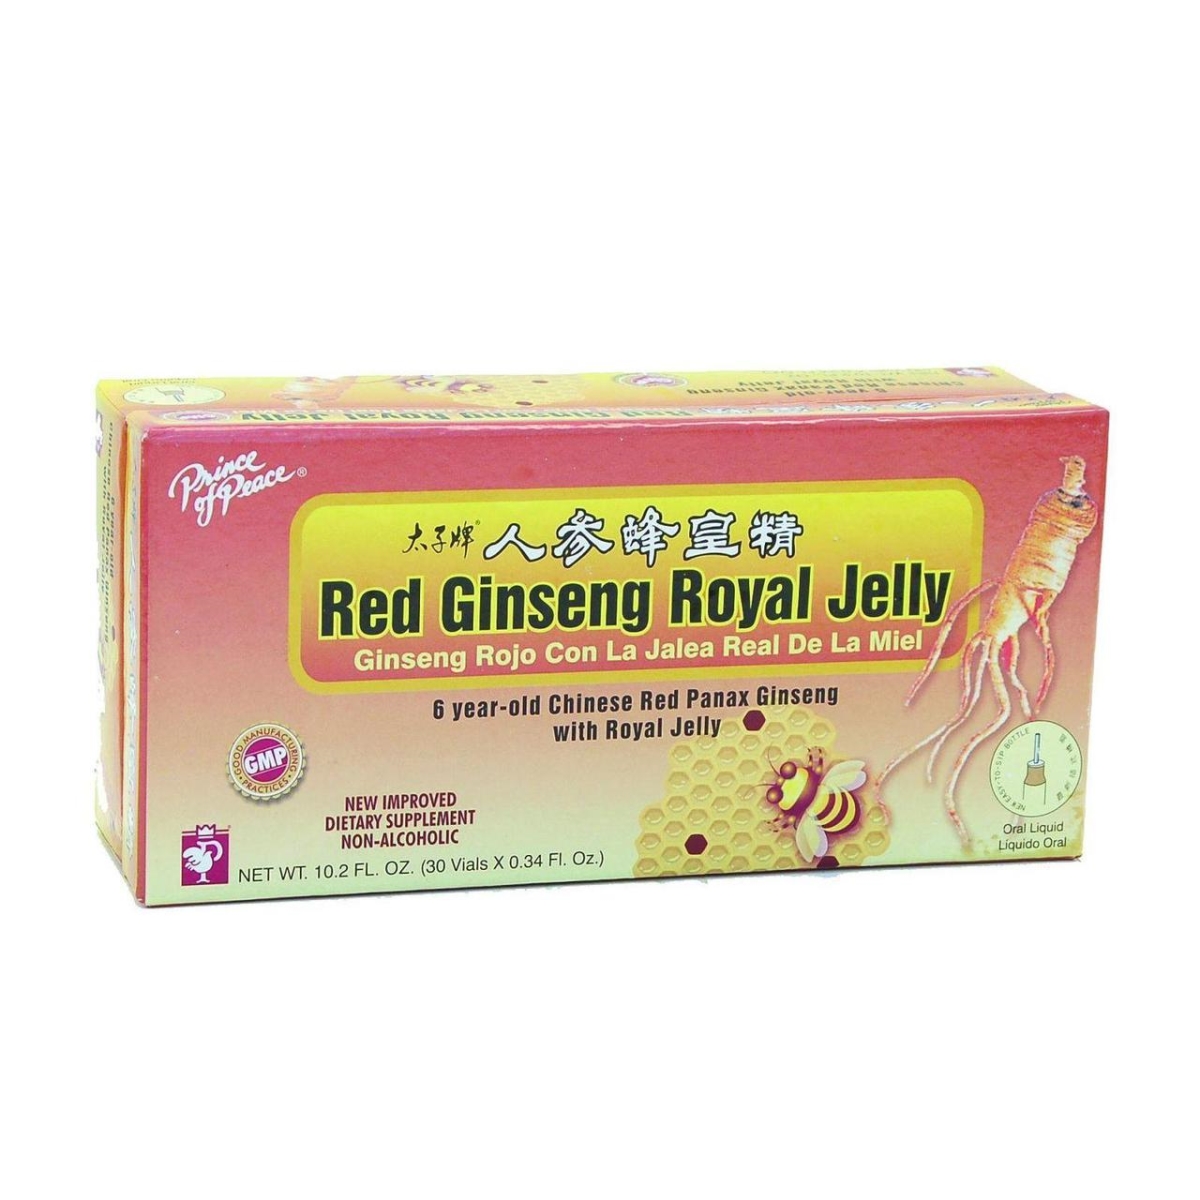 Hg0958660 10 Cc Red Ginseng - Royal Jelly, 30 Count